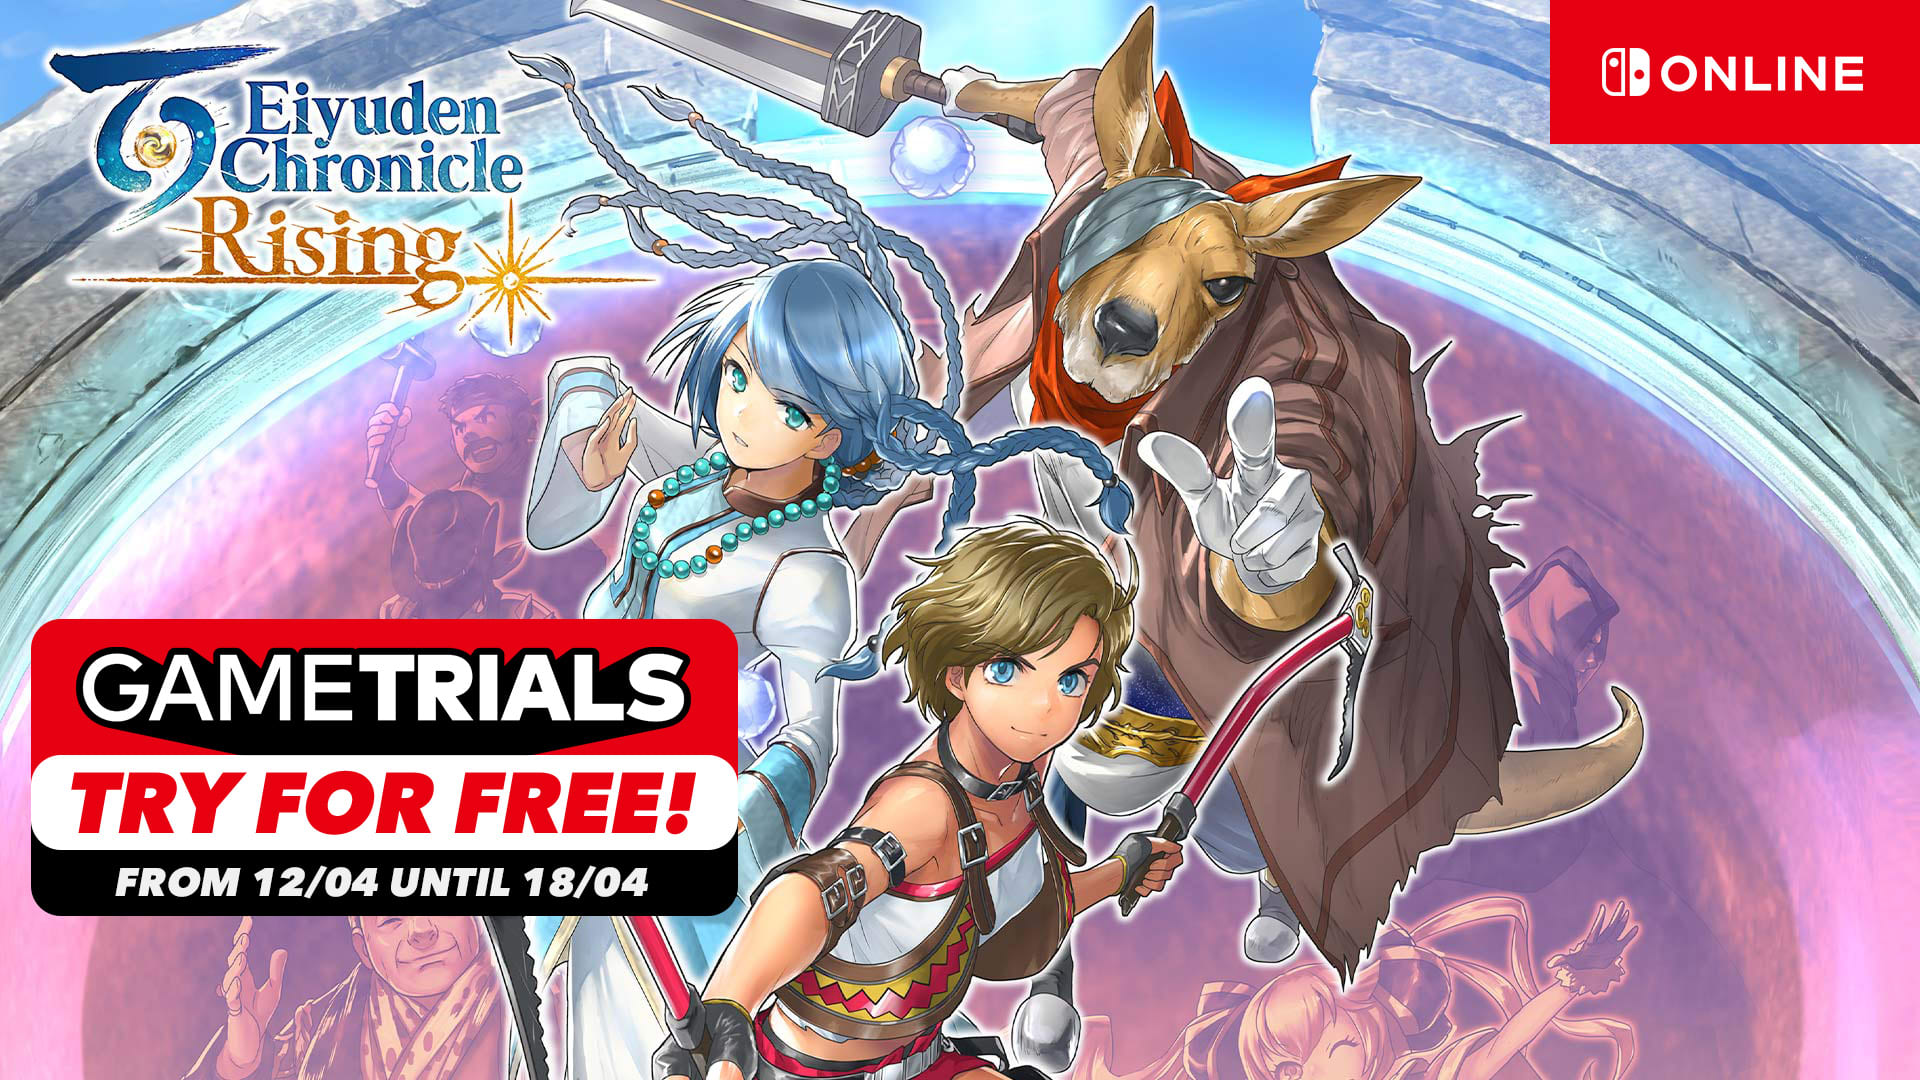 Eiyuden Chronicle: Rising Game Trial - Try for free from 12/4 until 19/4